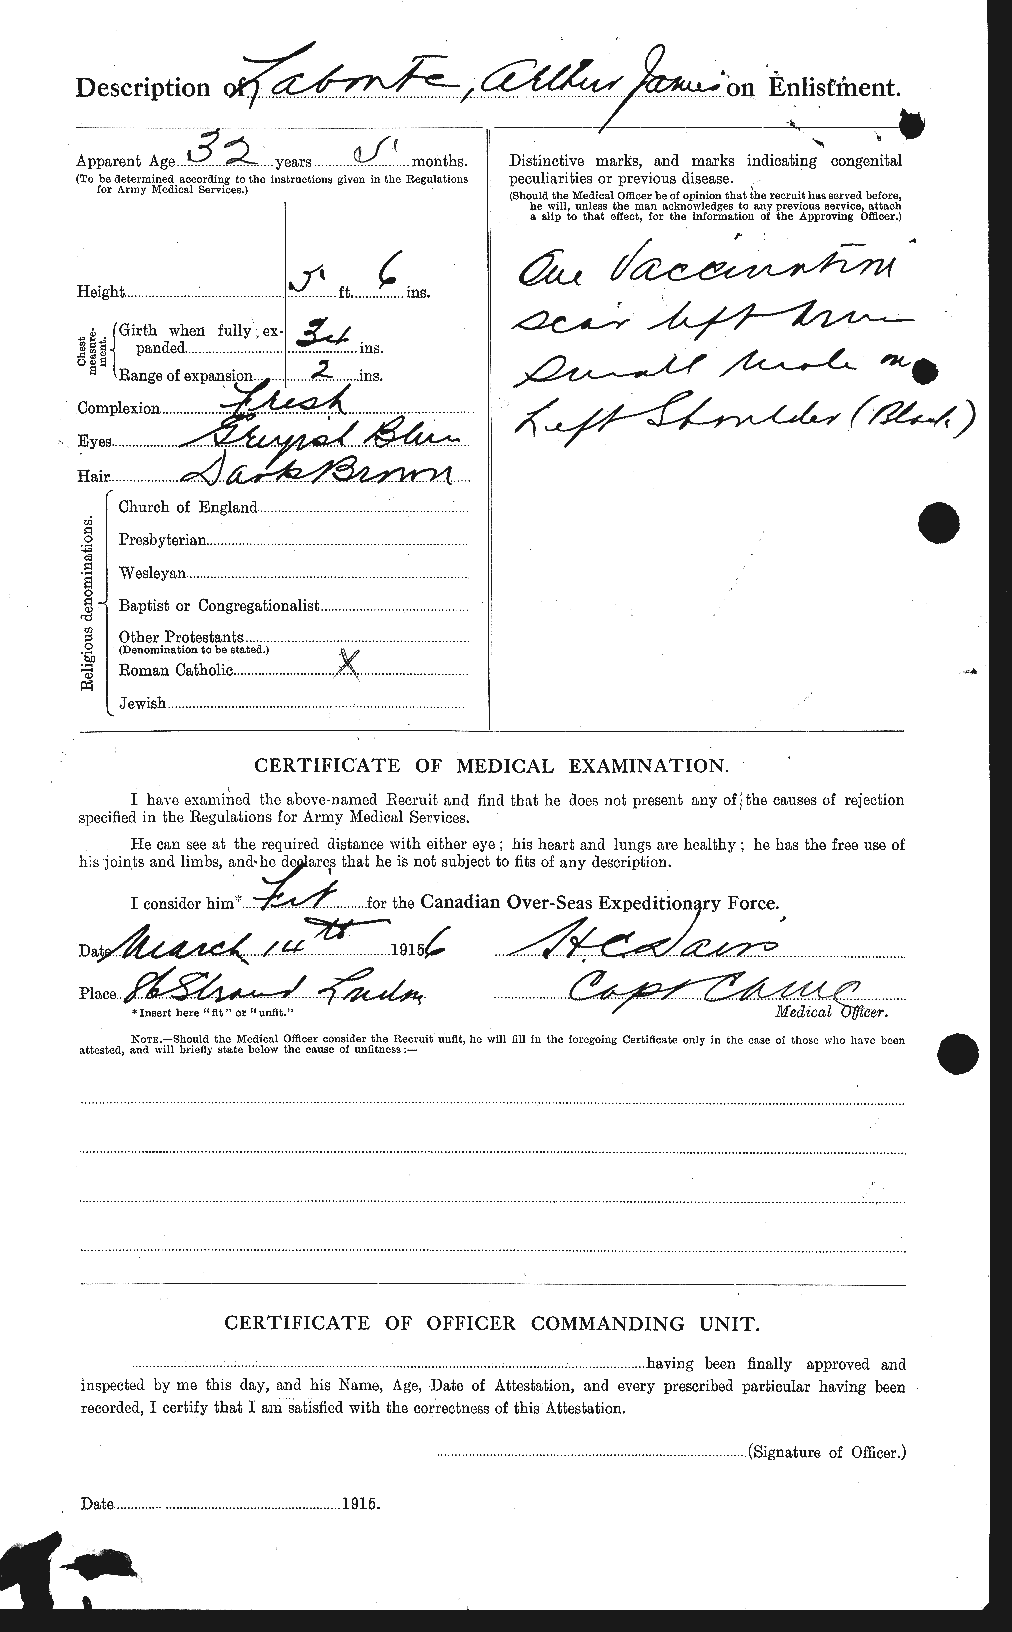 Personnel Records of the First World War - CEF 441774b